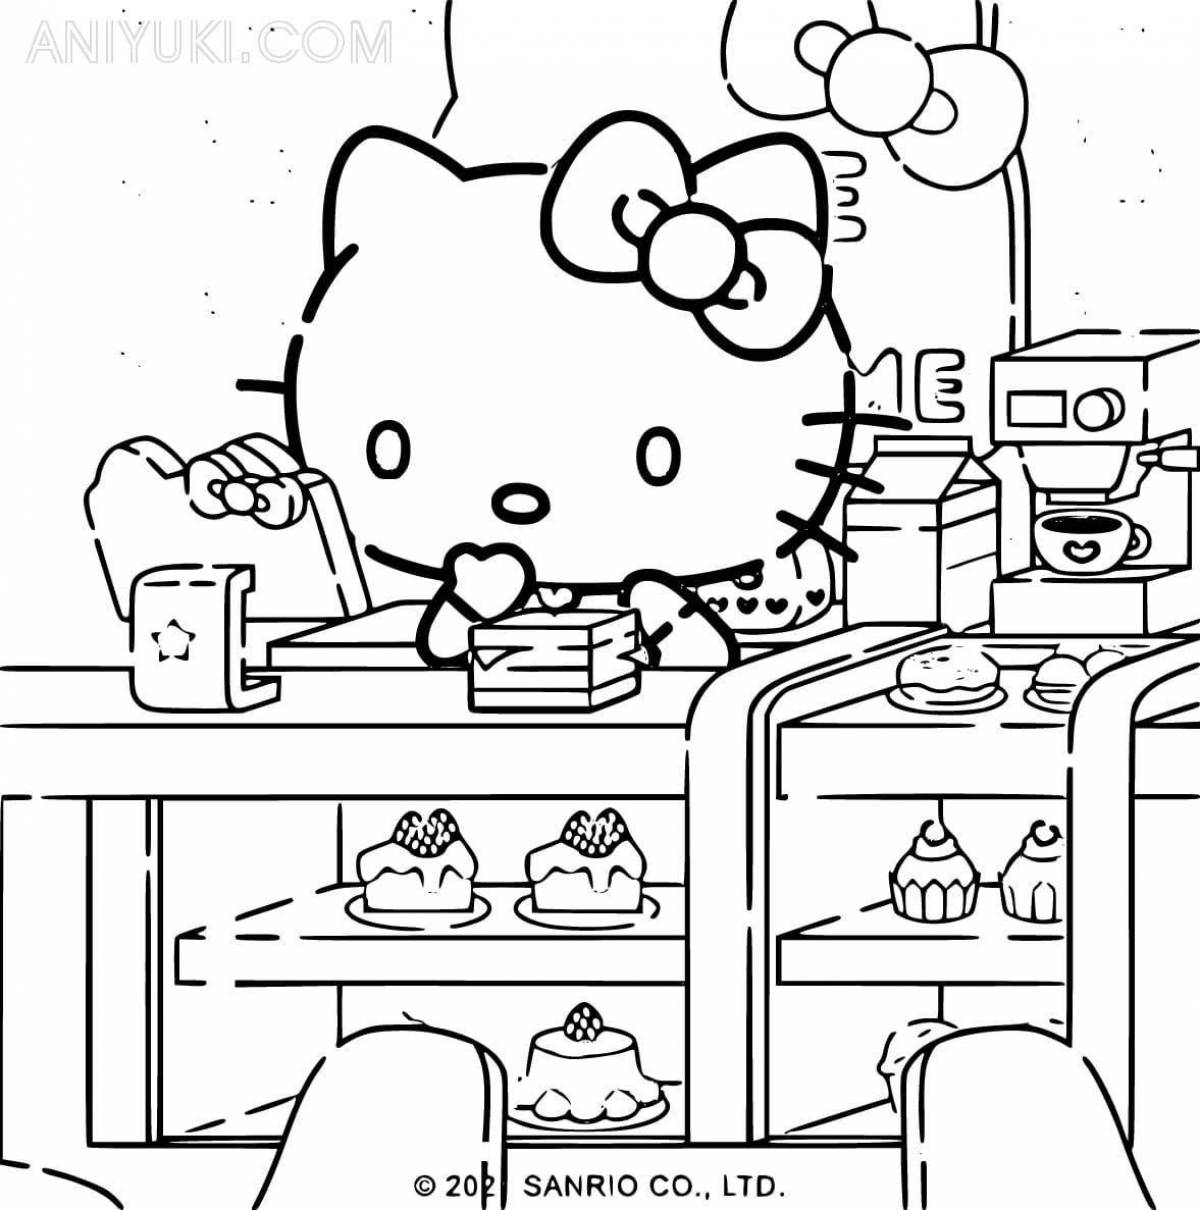 Charming hello kitty money coloring book